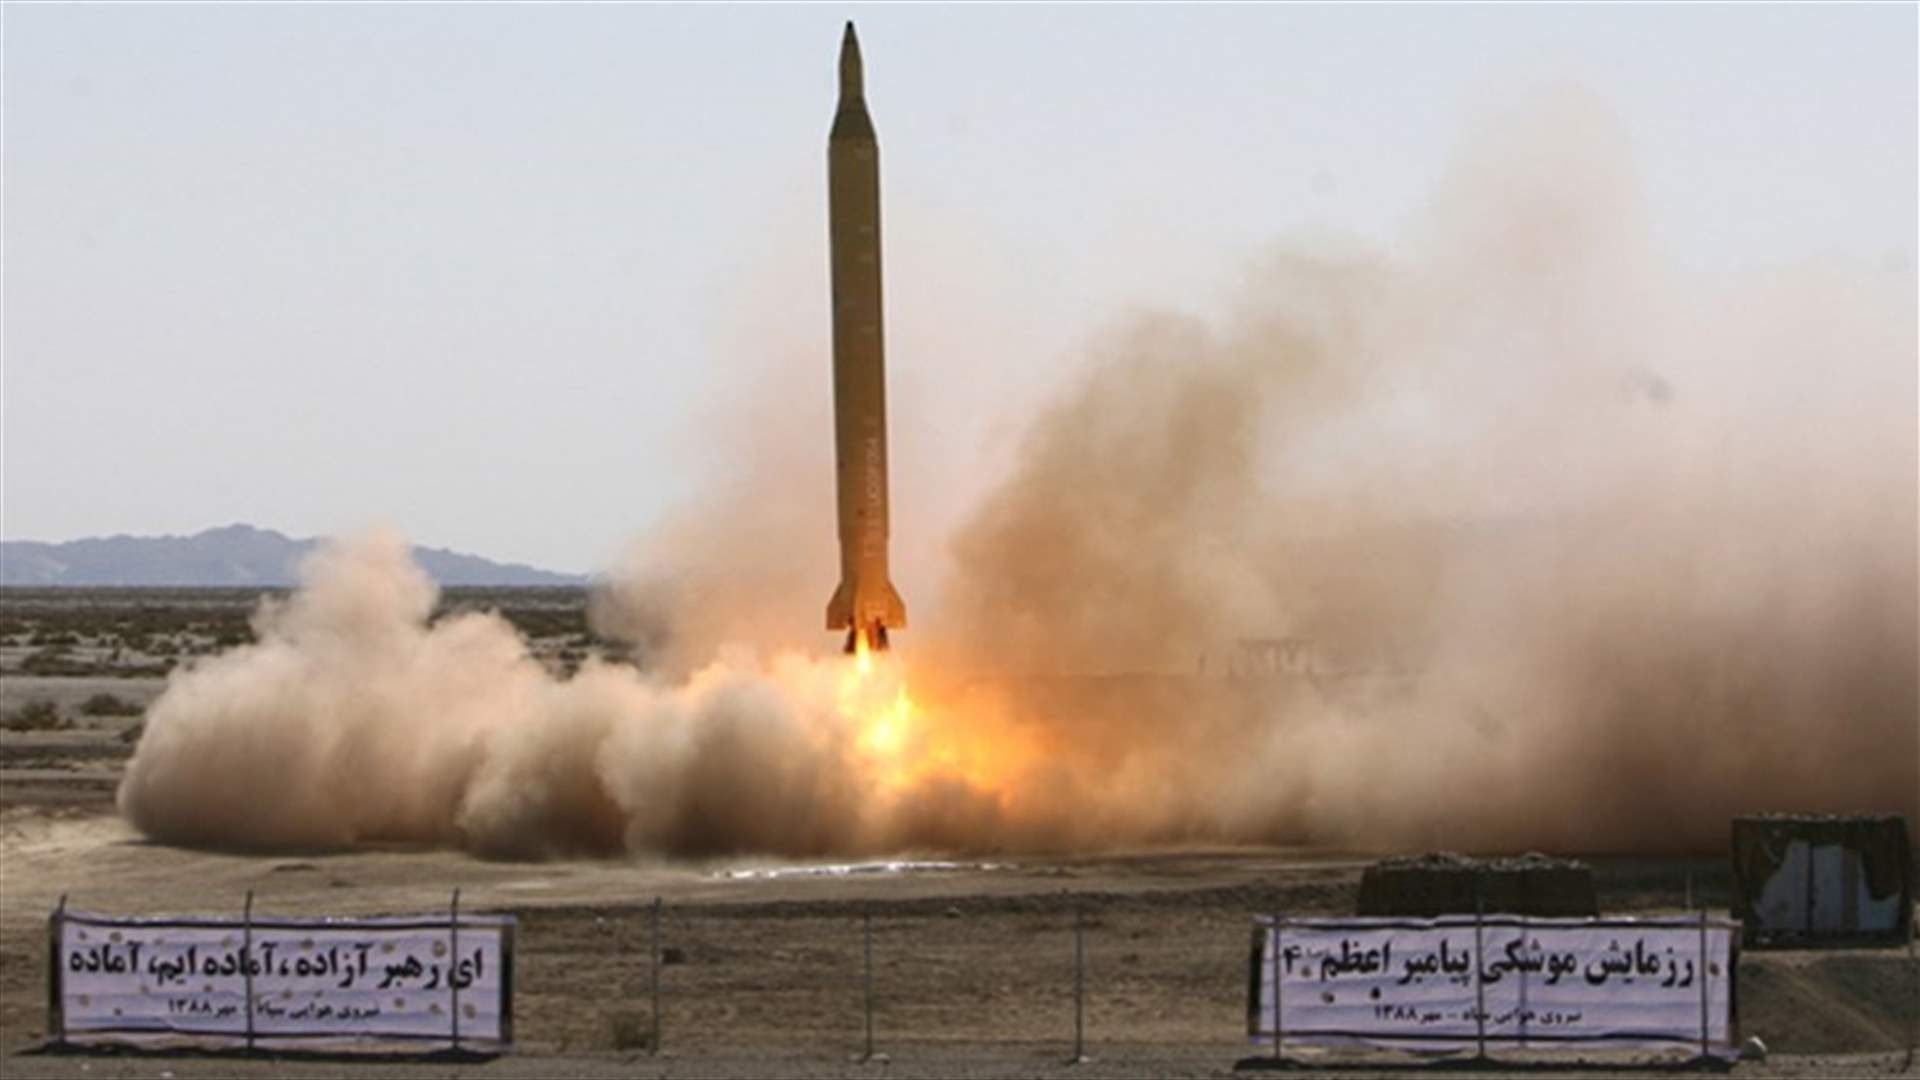 Iranian to strengthen missile programme - commander-in-chief